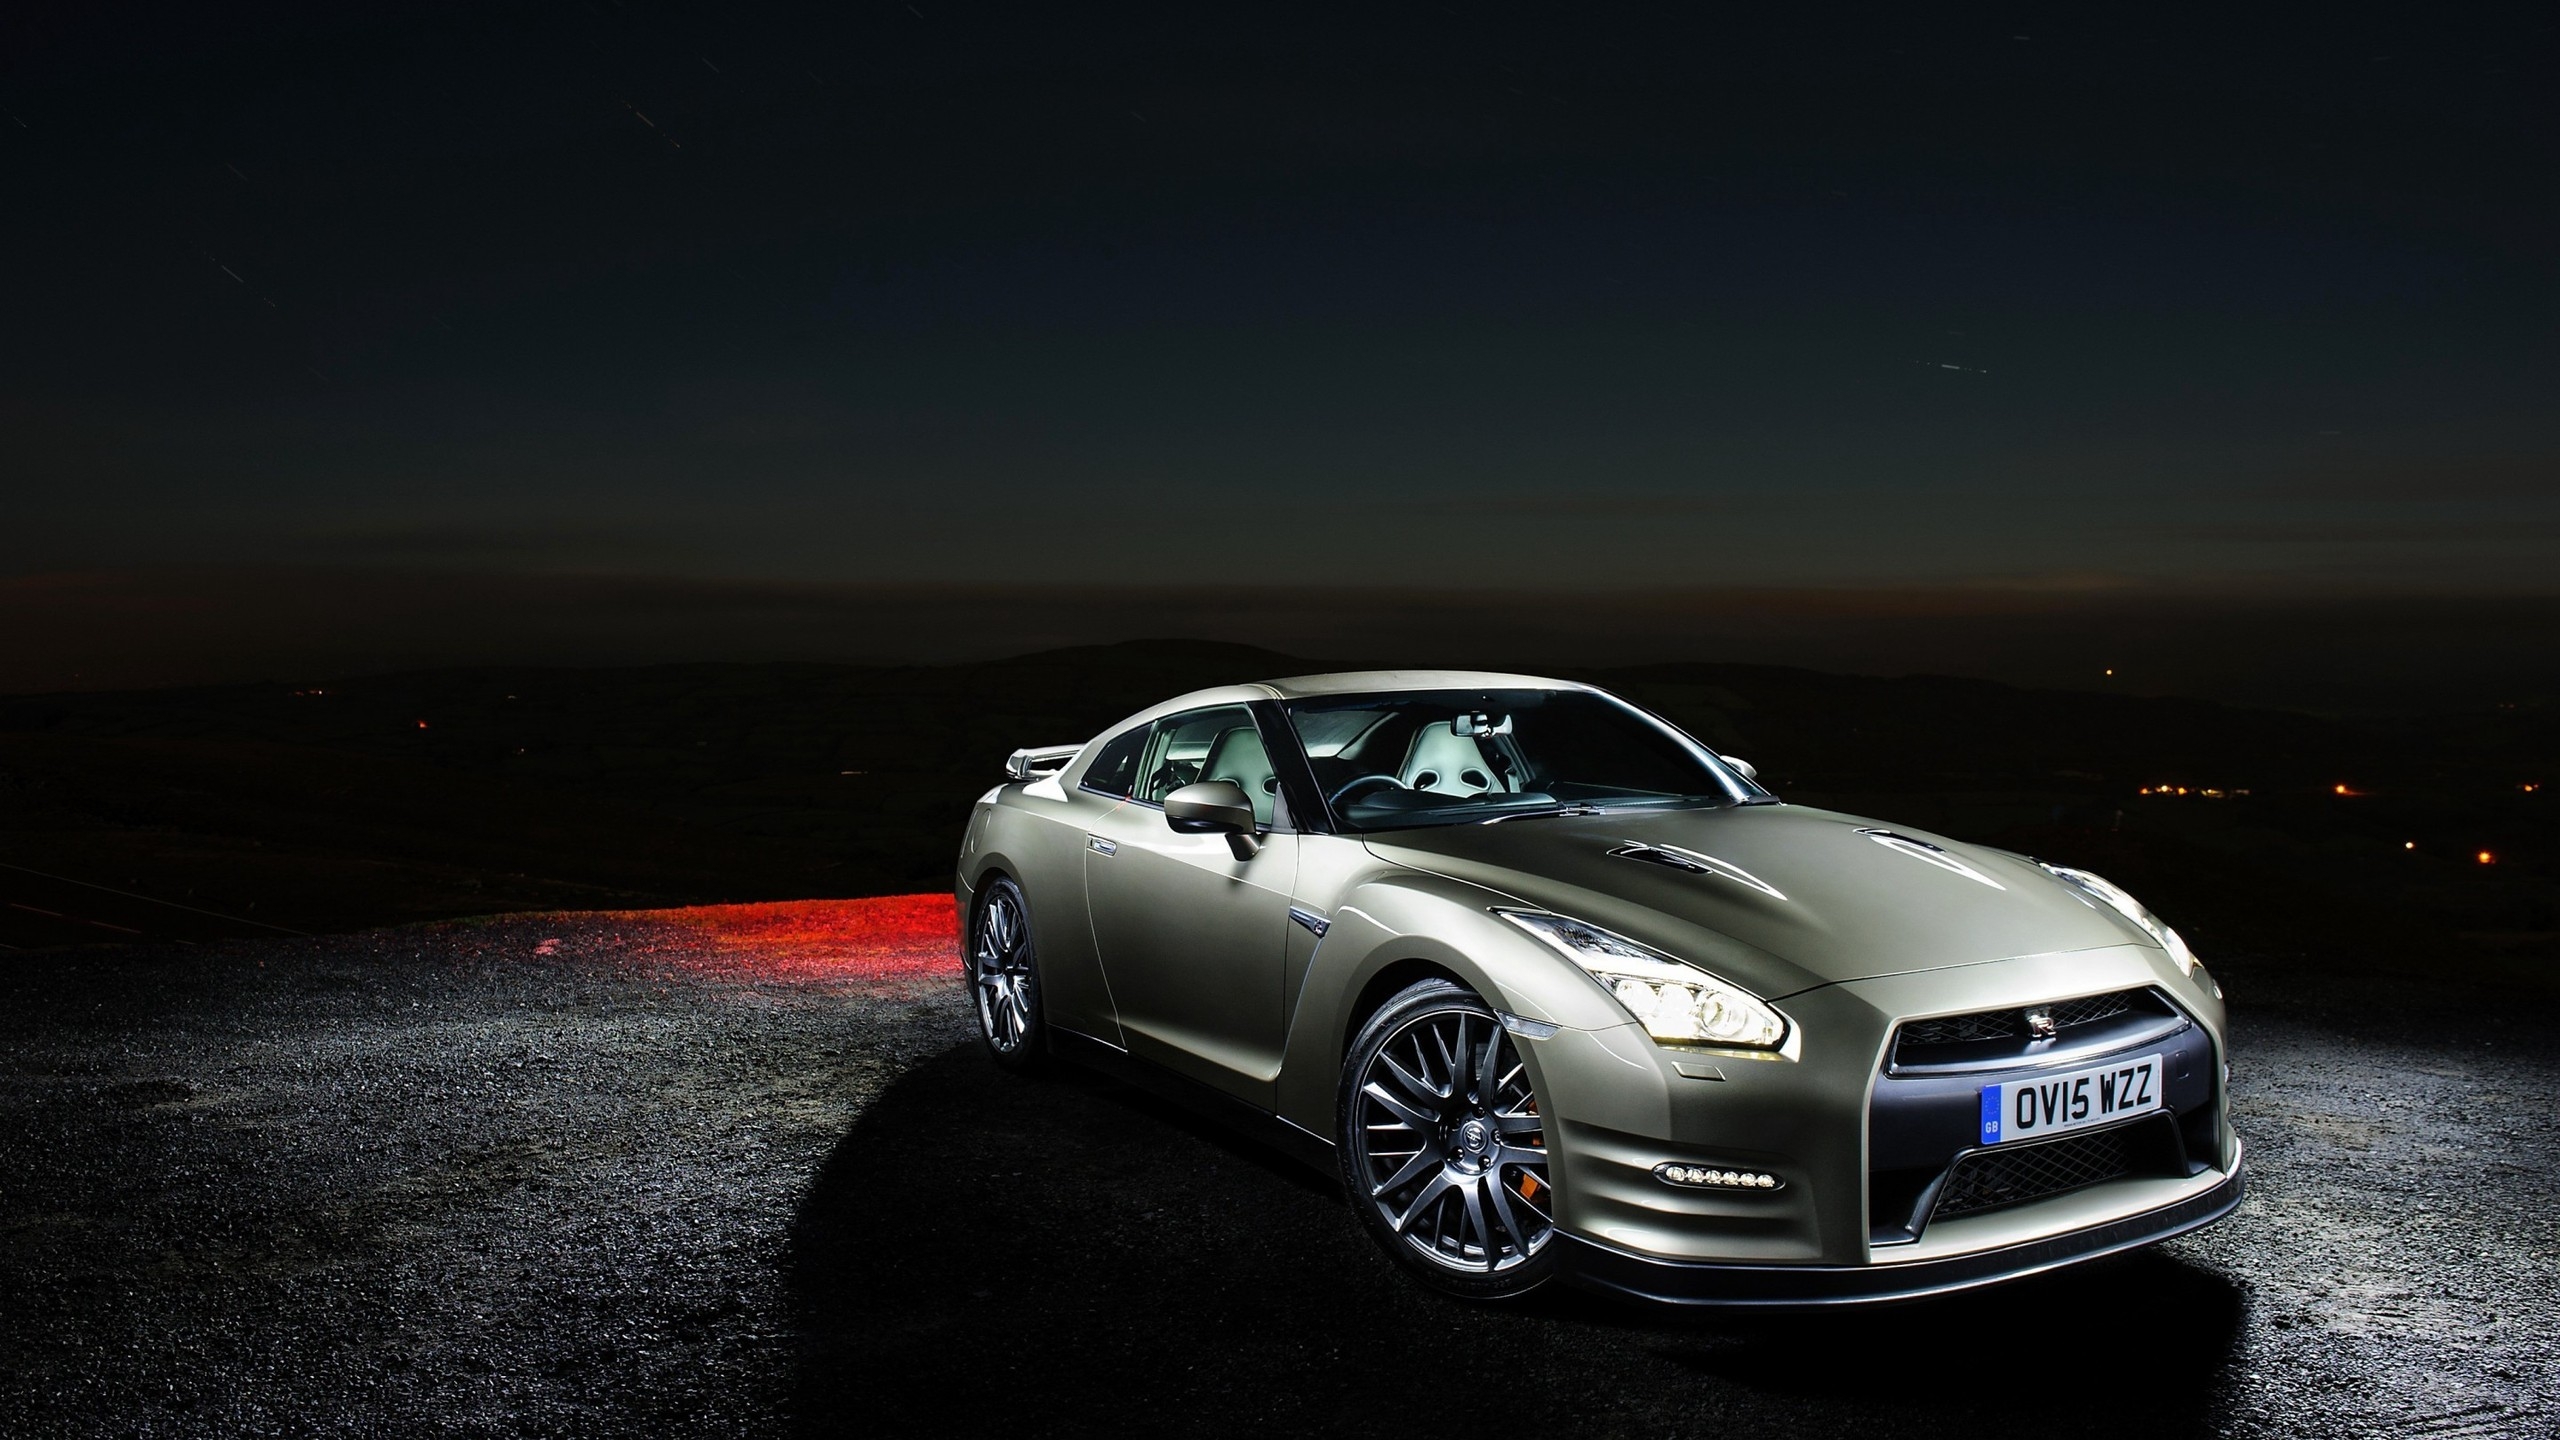 Nissan GT R 45th for 2560x1440 HDTV resolution